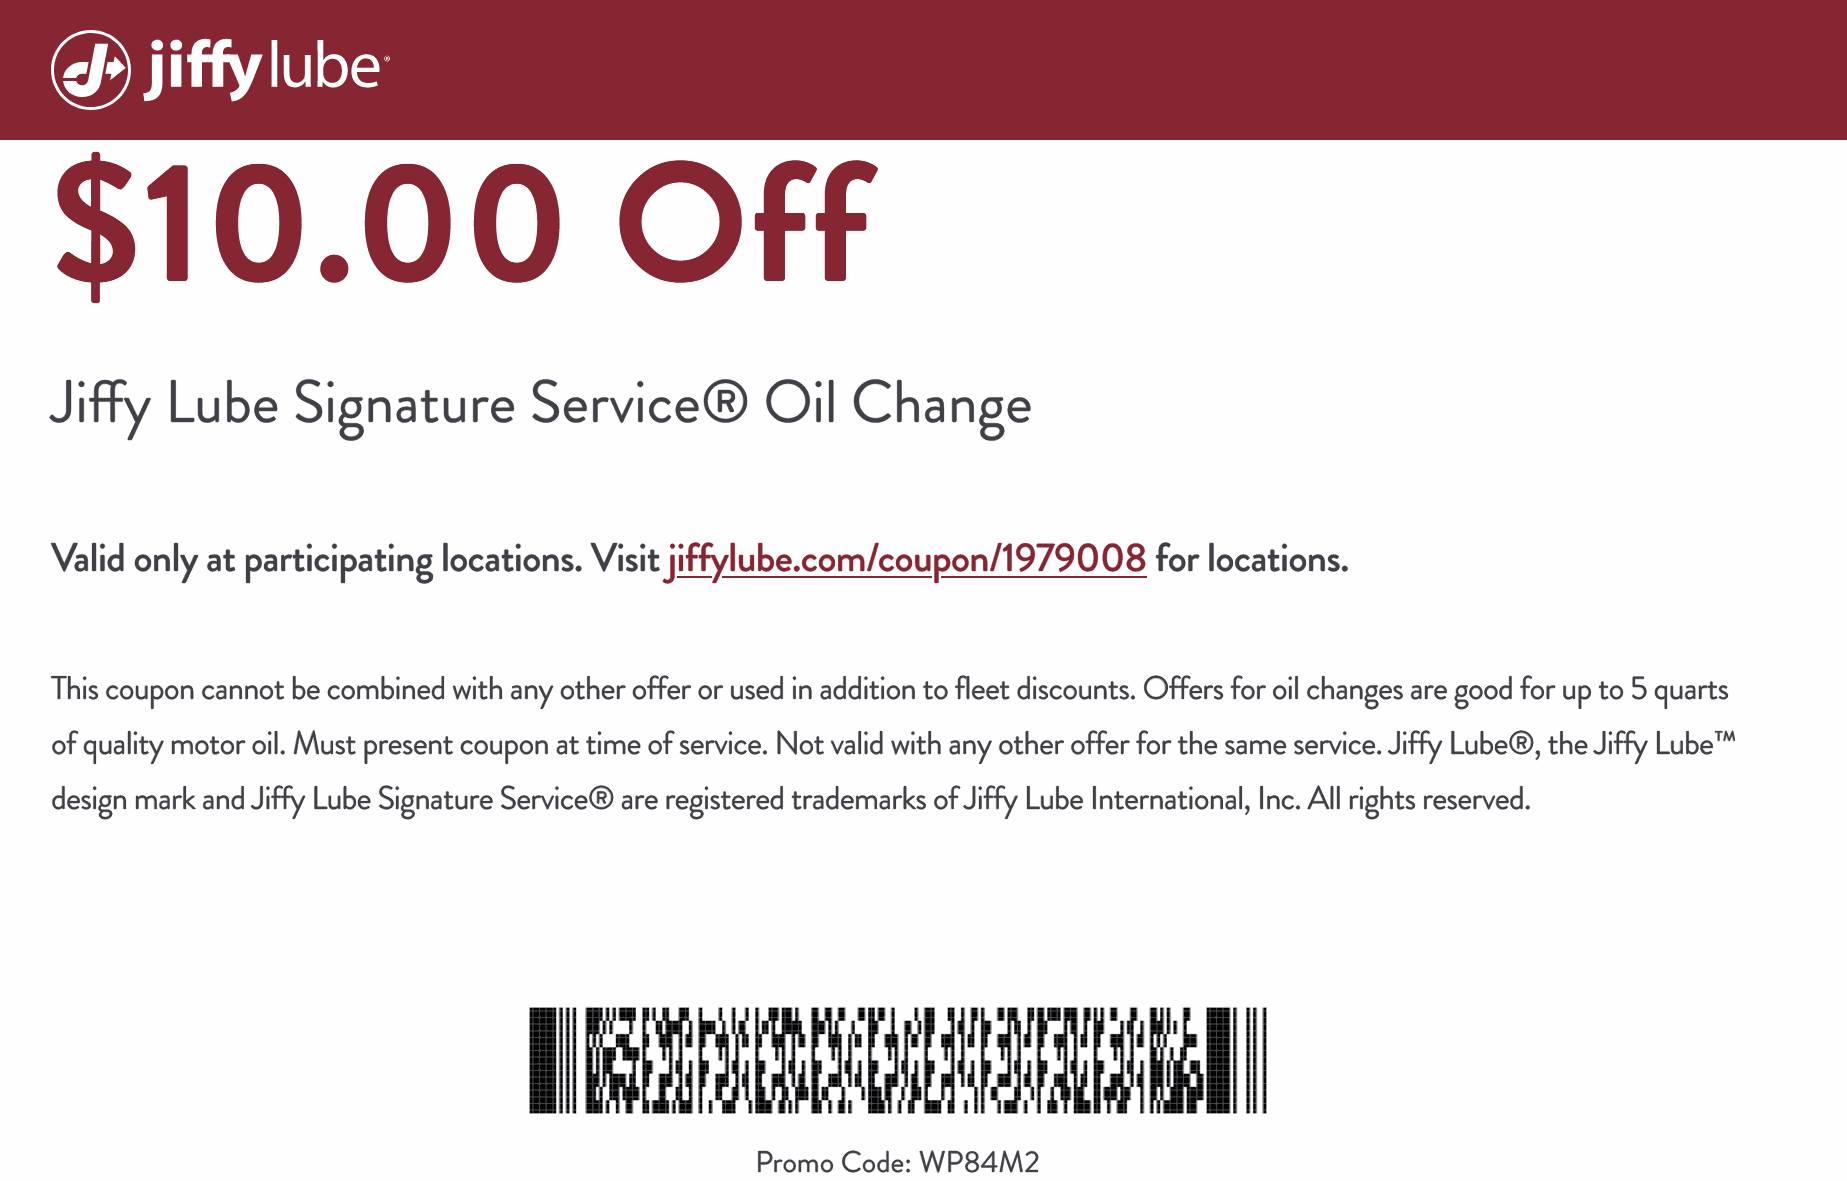 Jiffy Lube stores Coupon  $10 off signature oil change at Jiffy Lube #jiffylube 